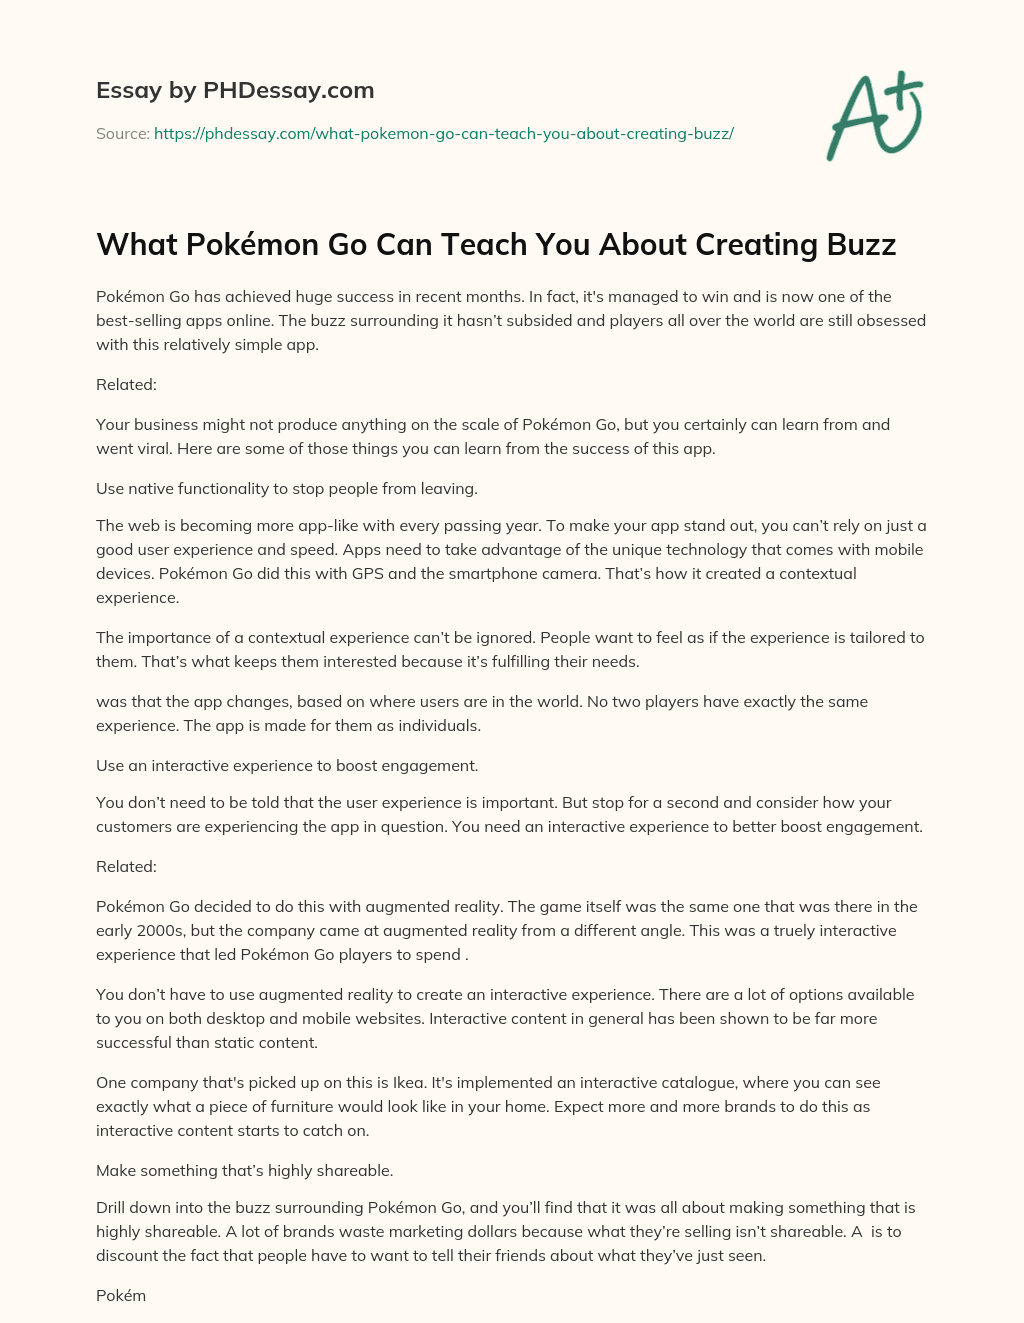 What Pokémon Go Can Teach You About Creating Buzz essay